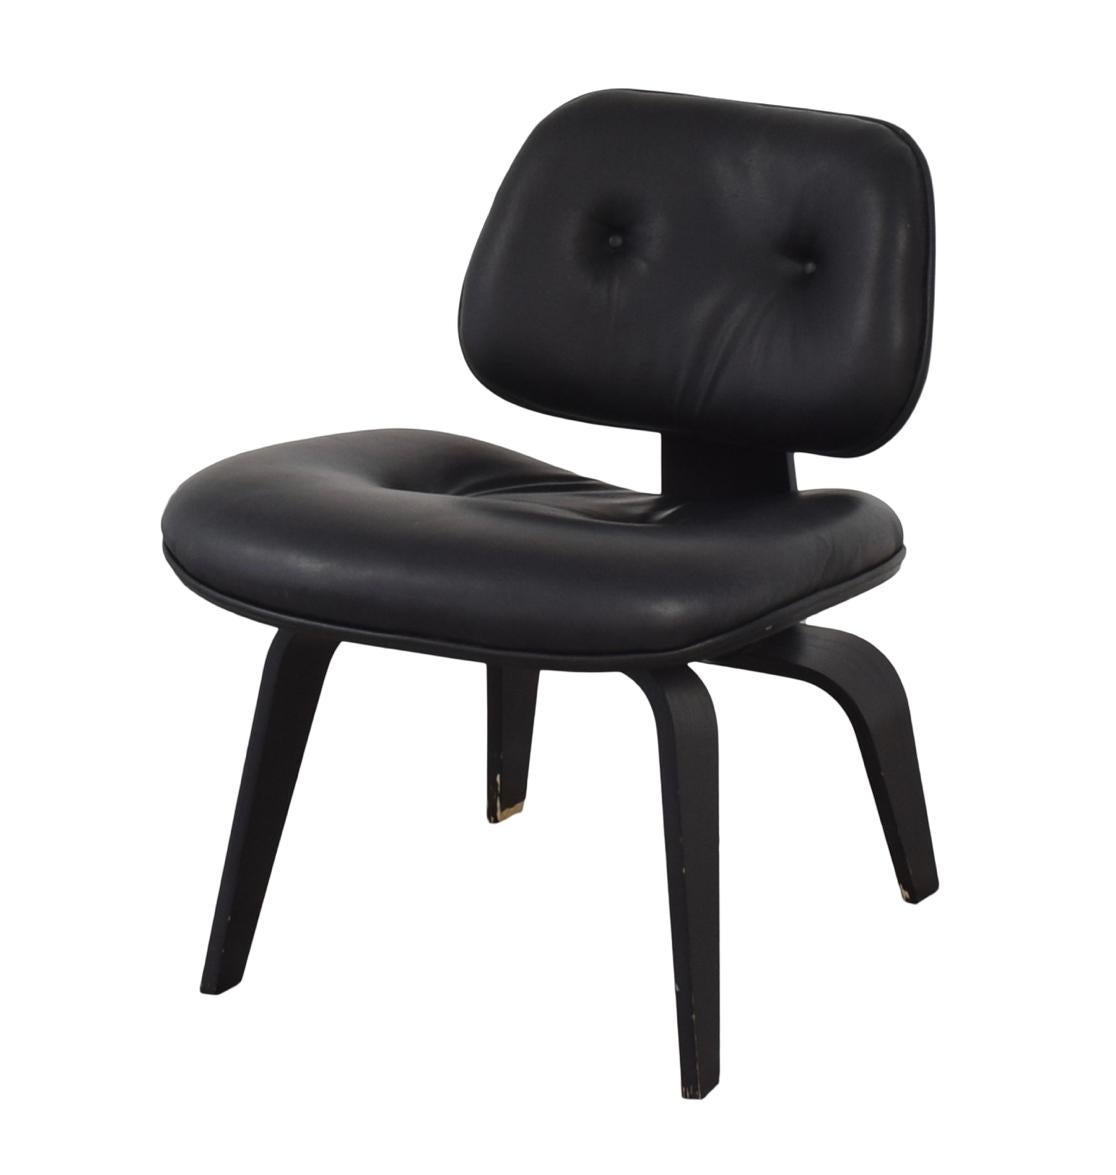 Mid-Century Modern Charles, Ray Eames Molded Plywood Chair, Black Birch and Leather, Herman Miller